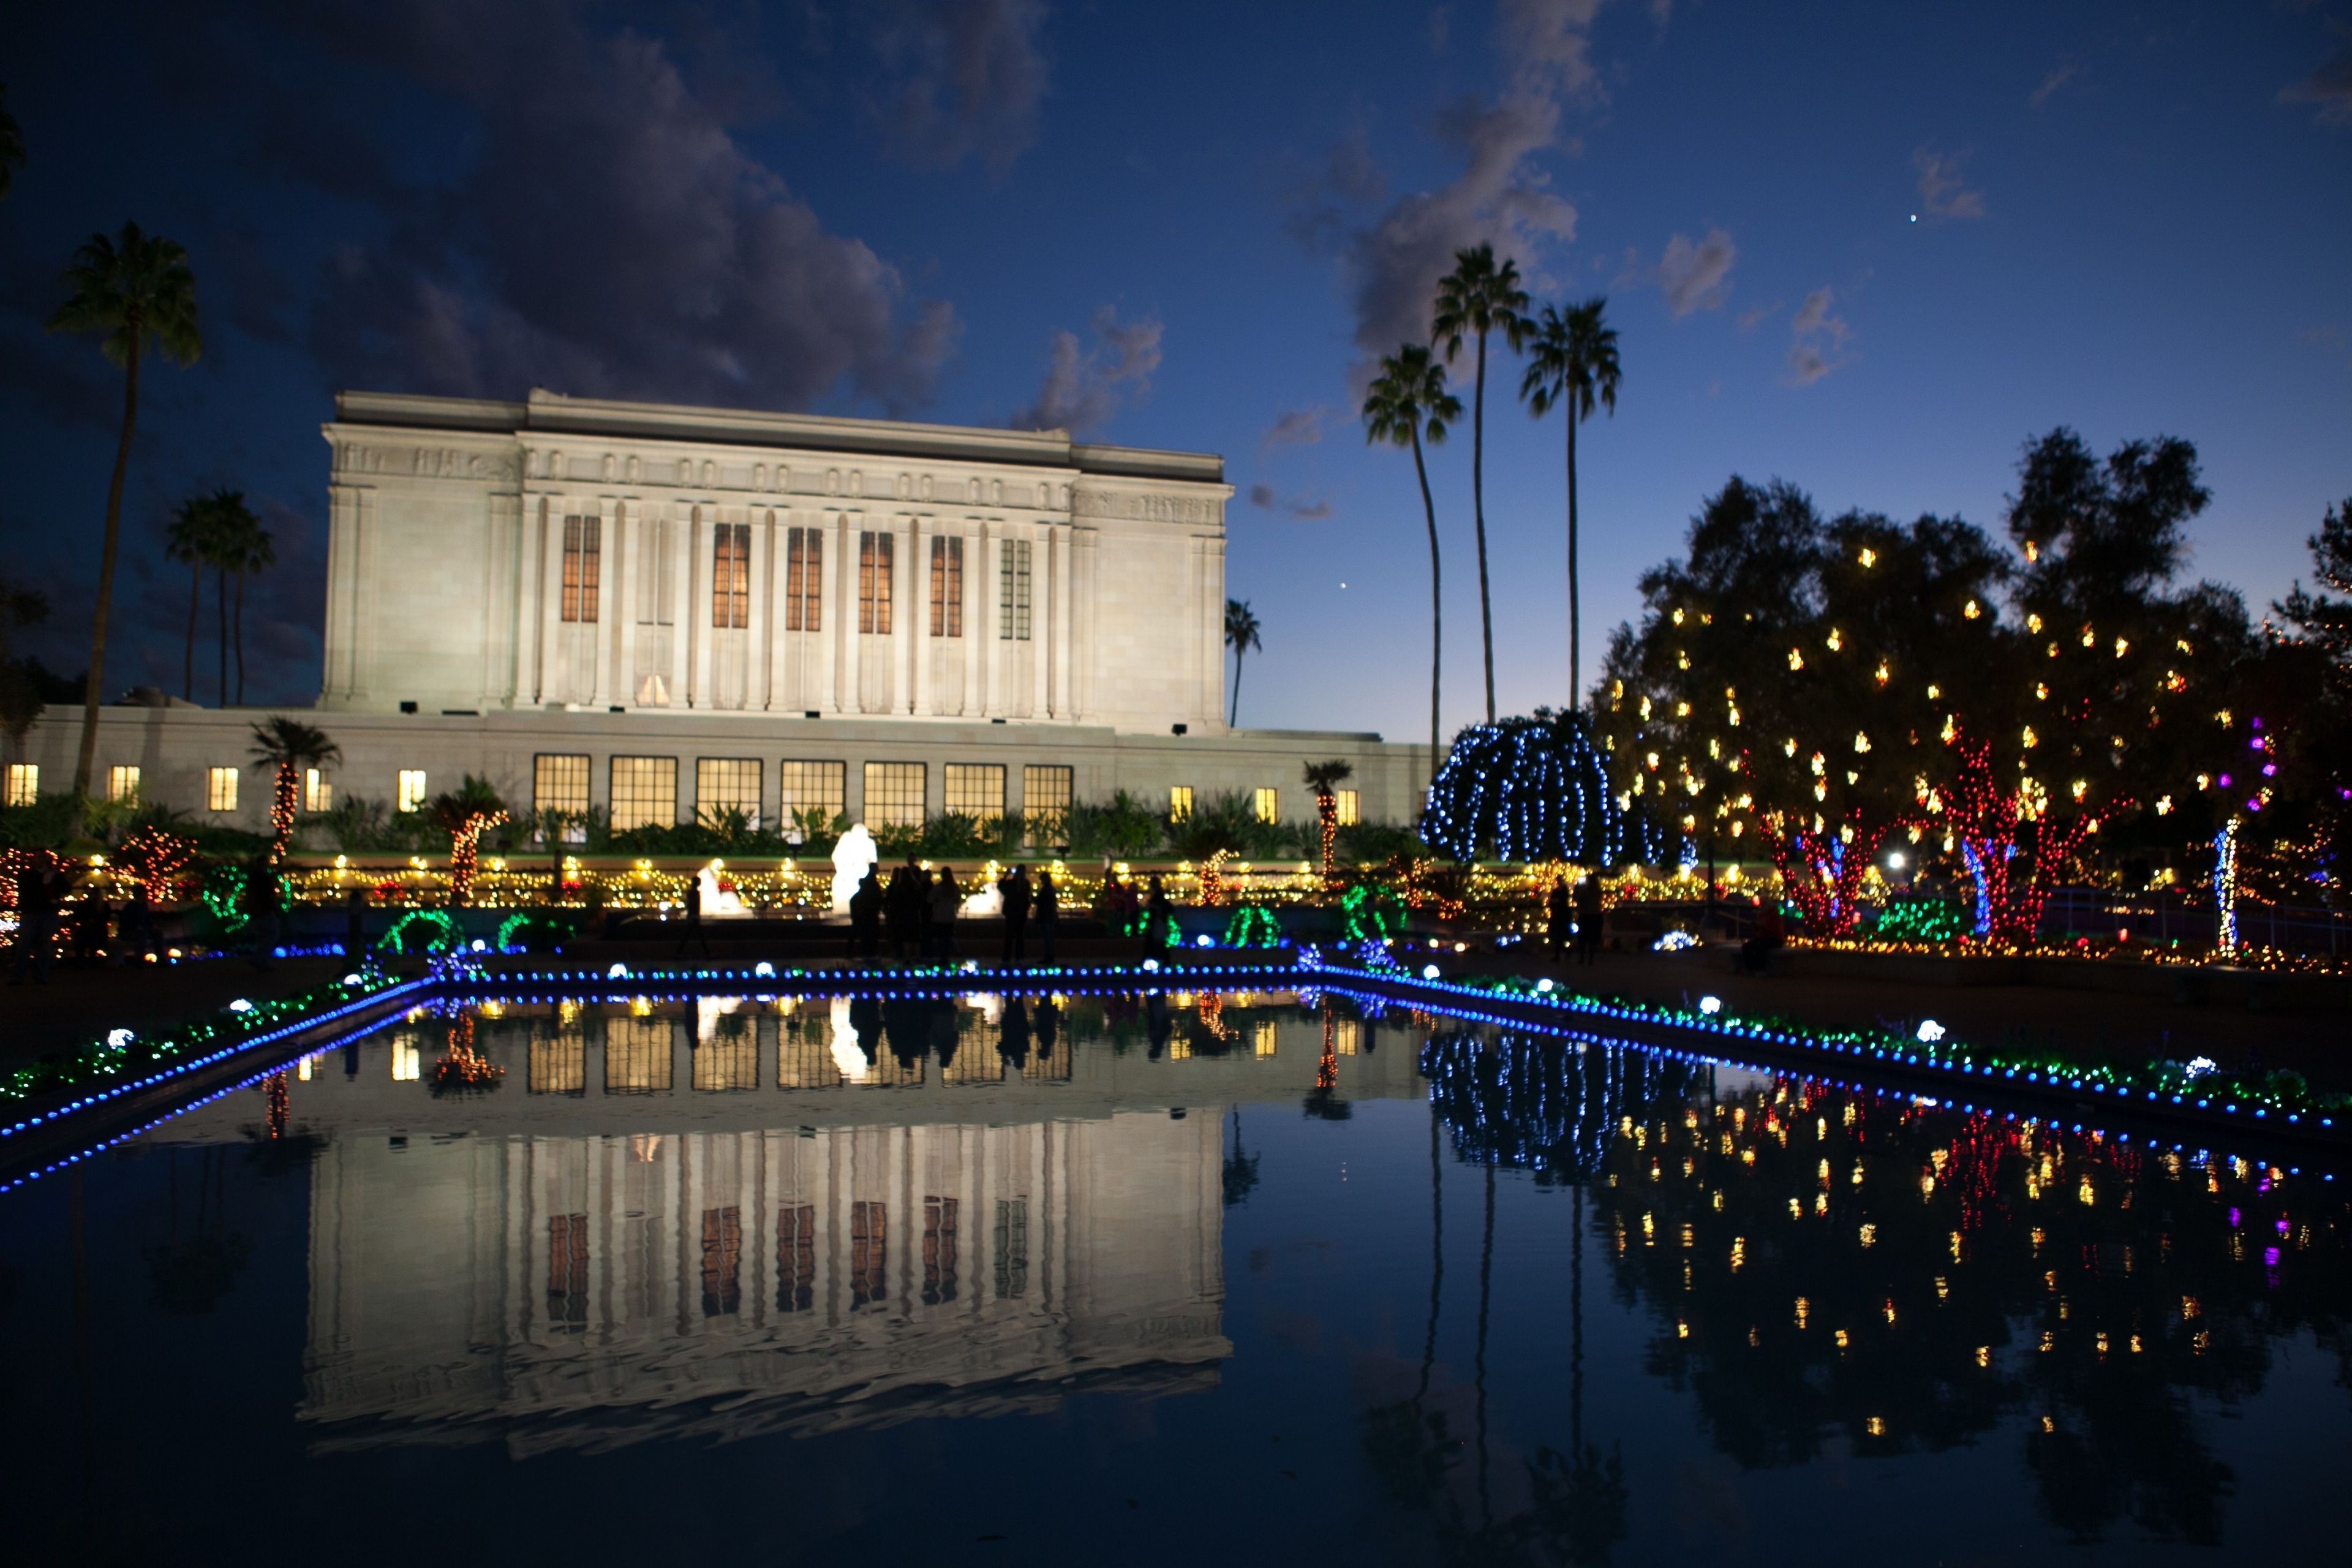 The Mesa Arizona Temple and grounds decorated for Christmas.